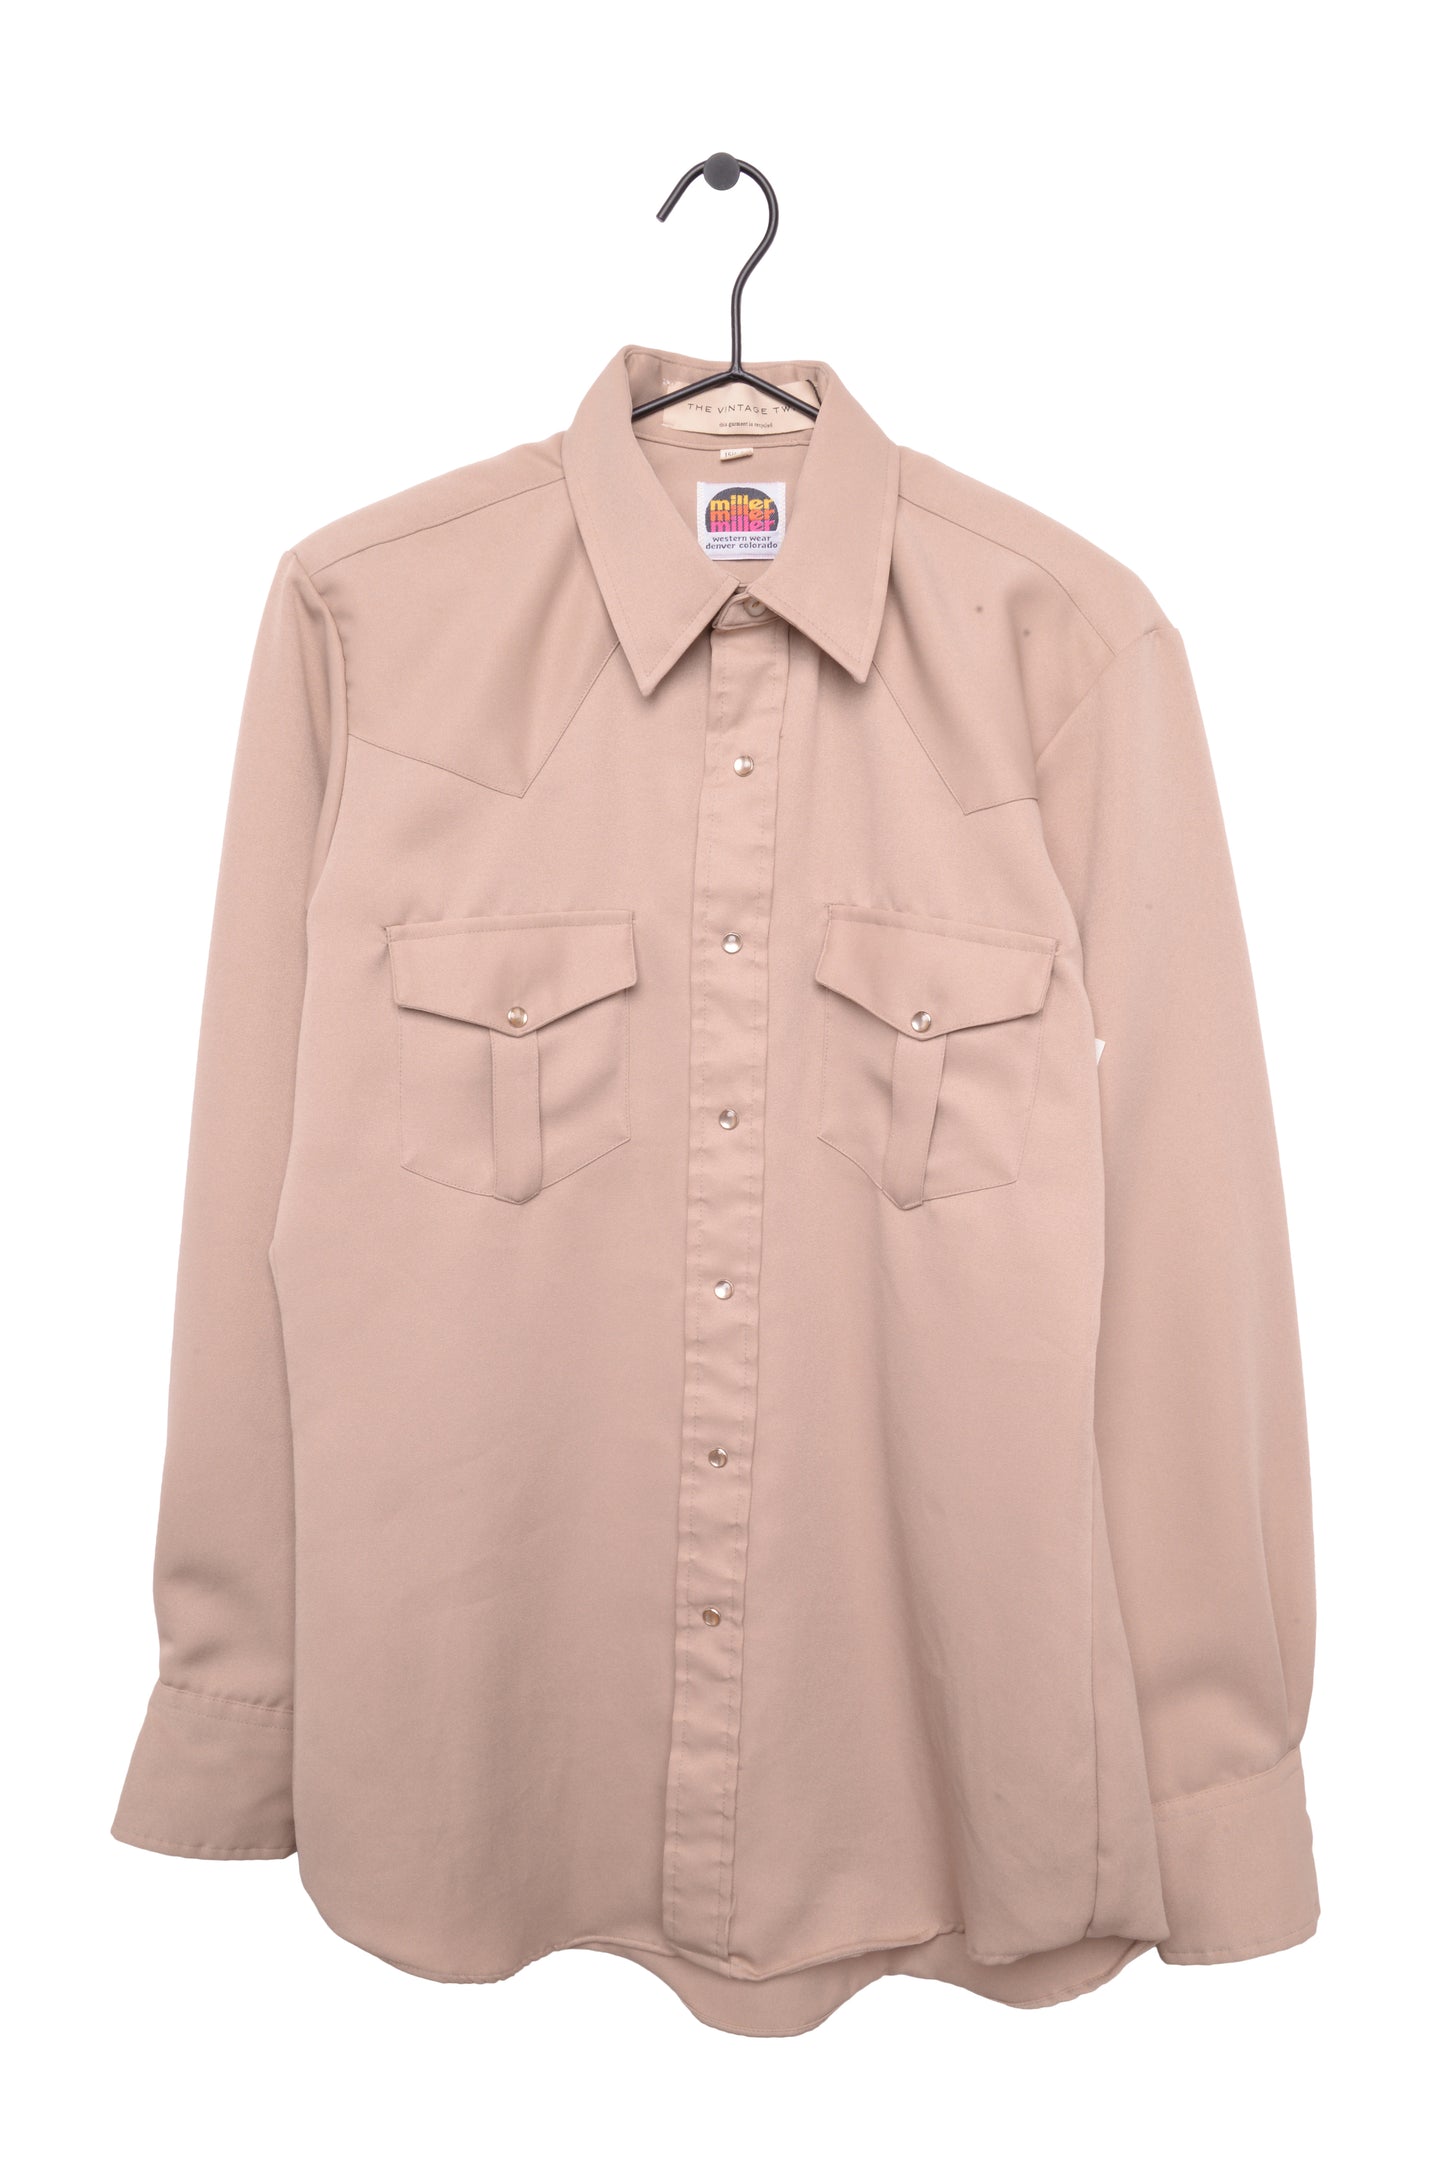 Western Pearl Snap Button Down